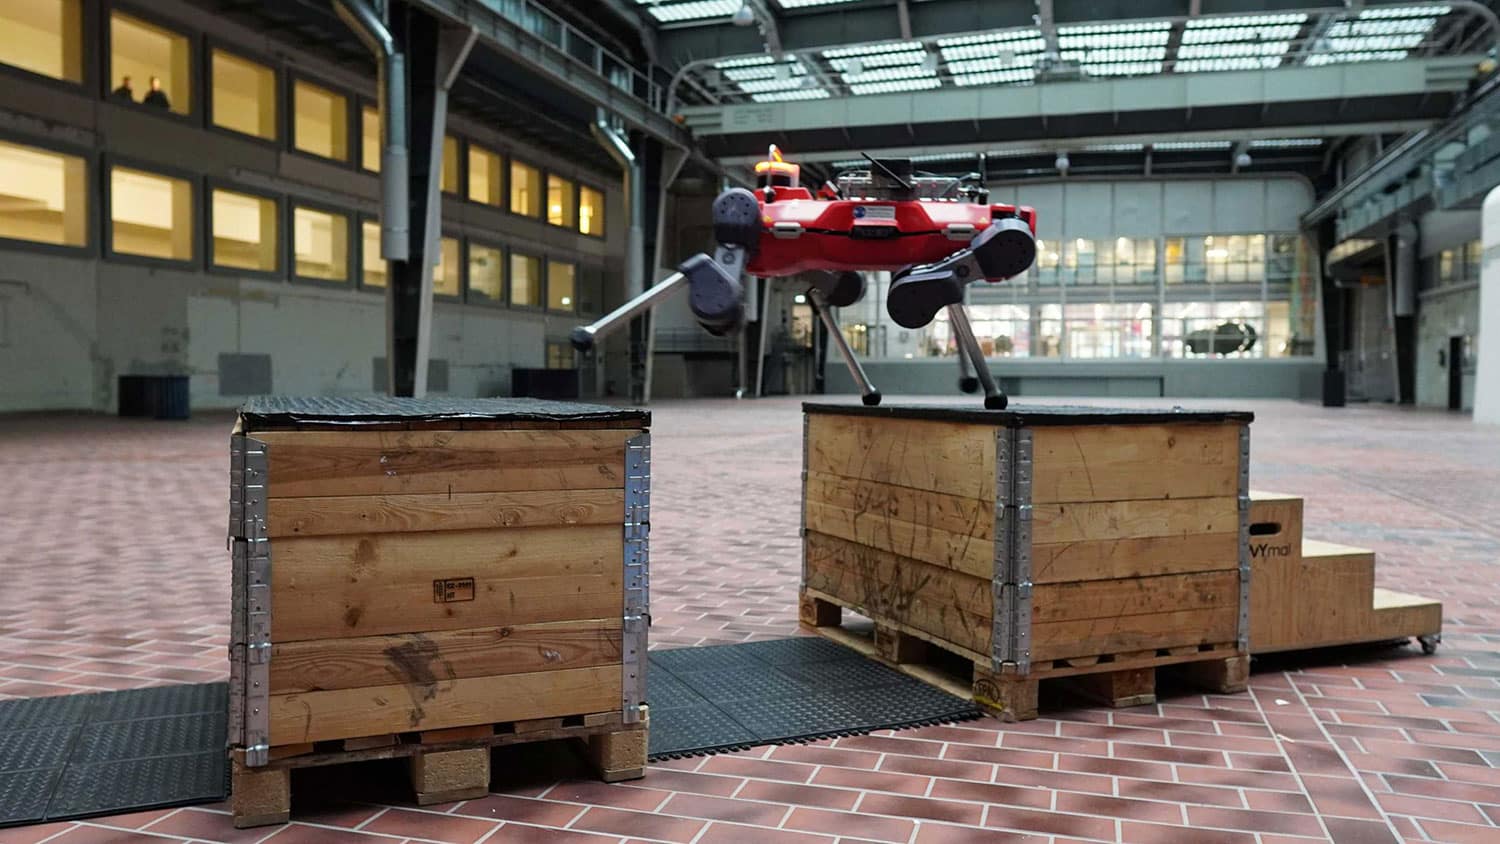 The quadrupedal robot ANYmal practises parkour in a hall at ETH Zurich.